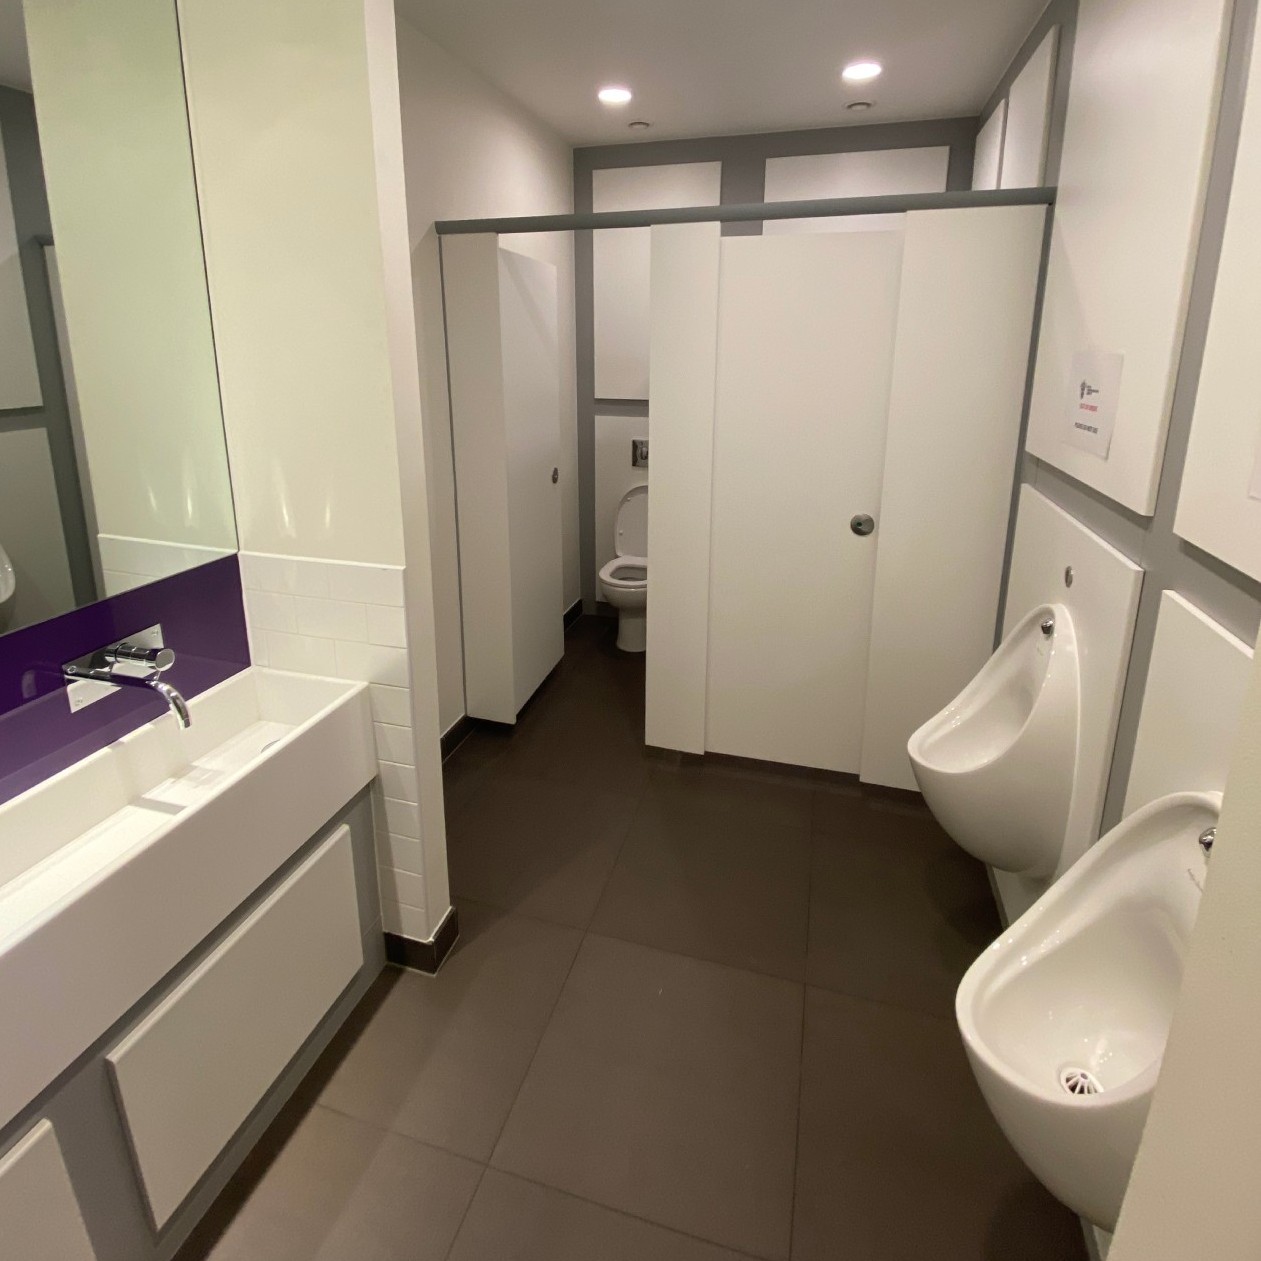 View of Men's toilet including cubicles urinals, mirror and sinks